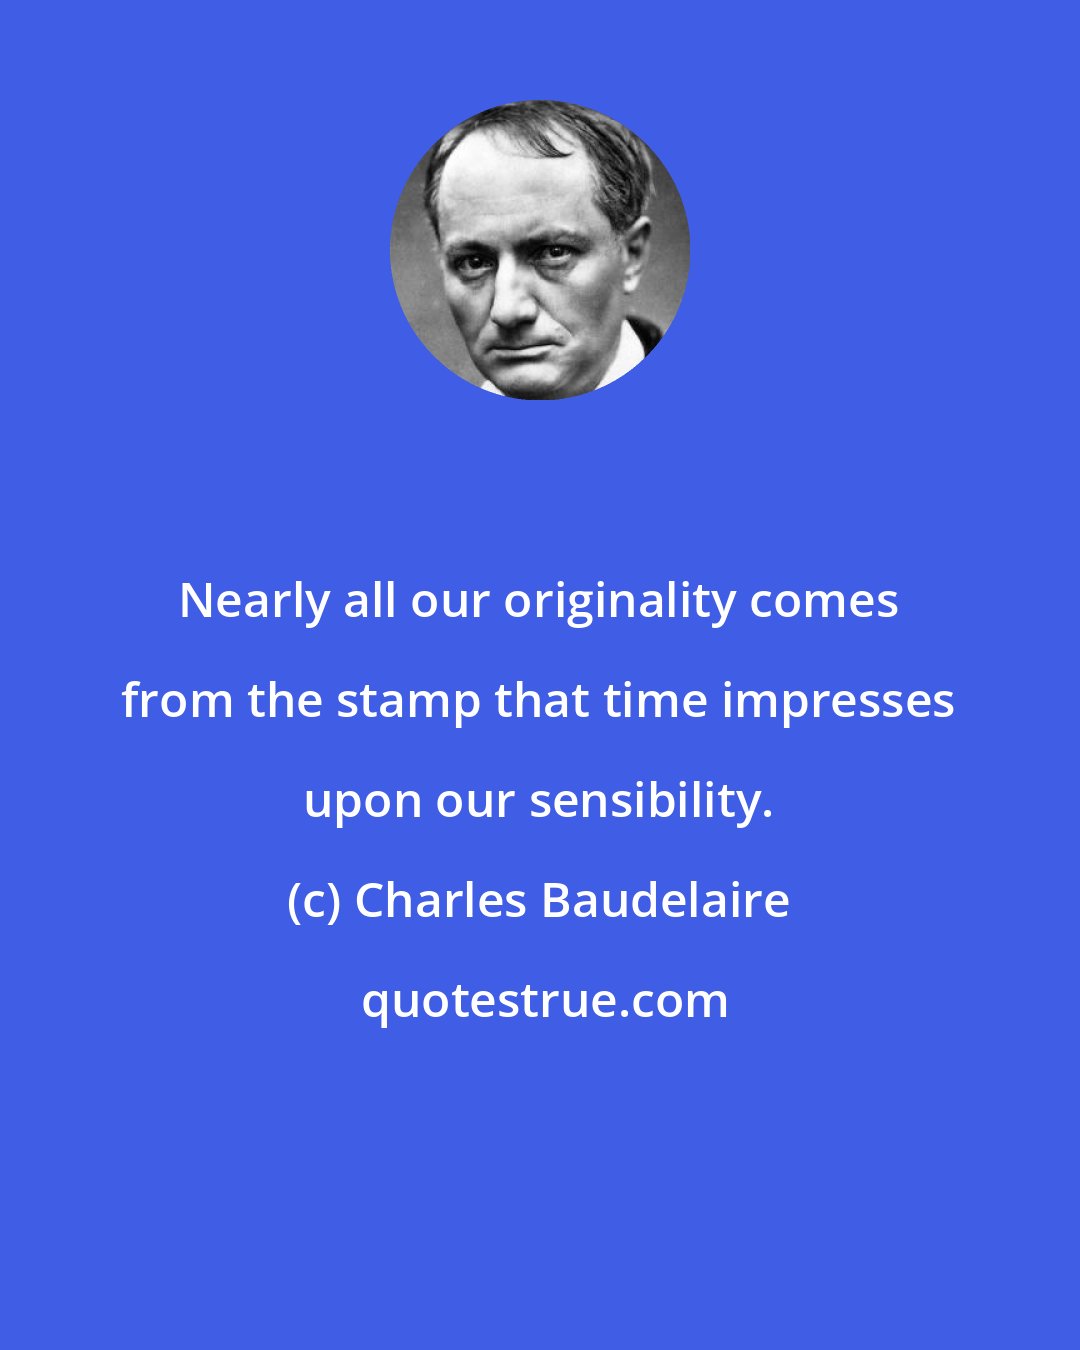 Charles Baudelaire: Nearly all our originality comes from the stamp that time impresses upon our sensibility.